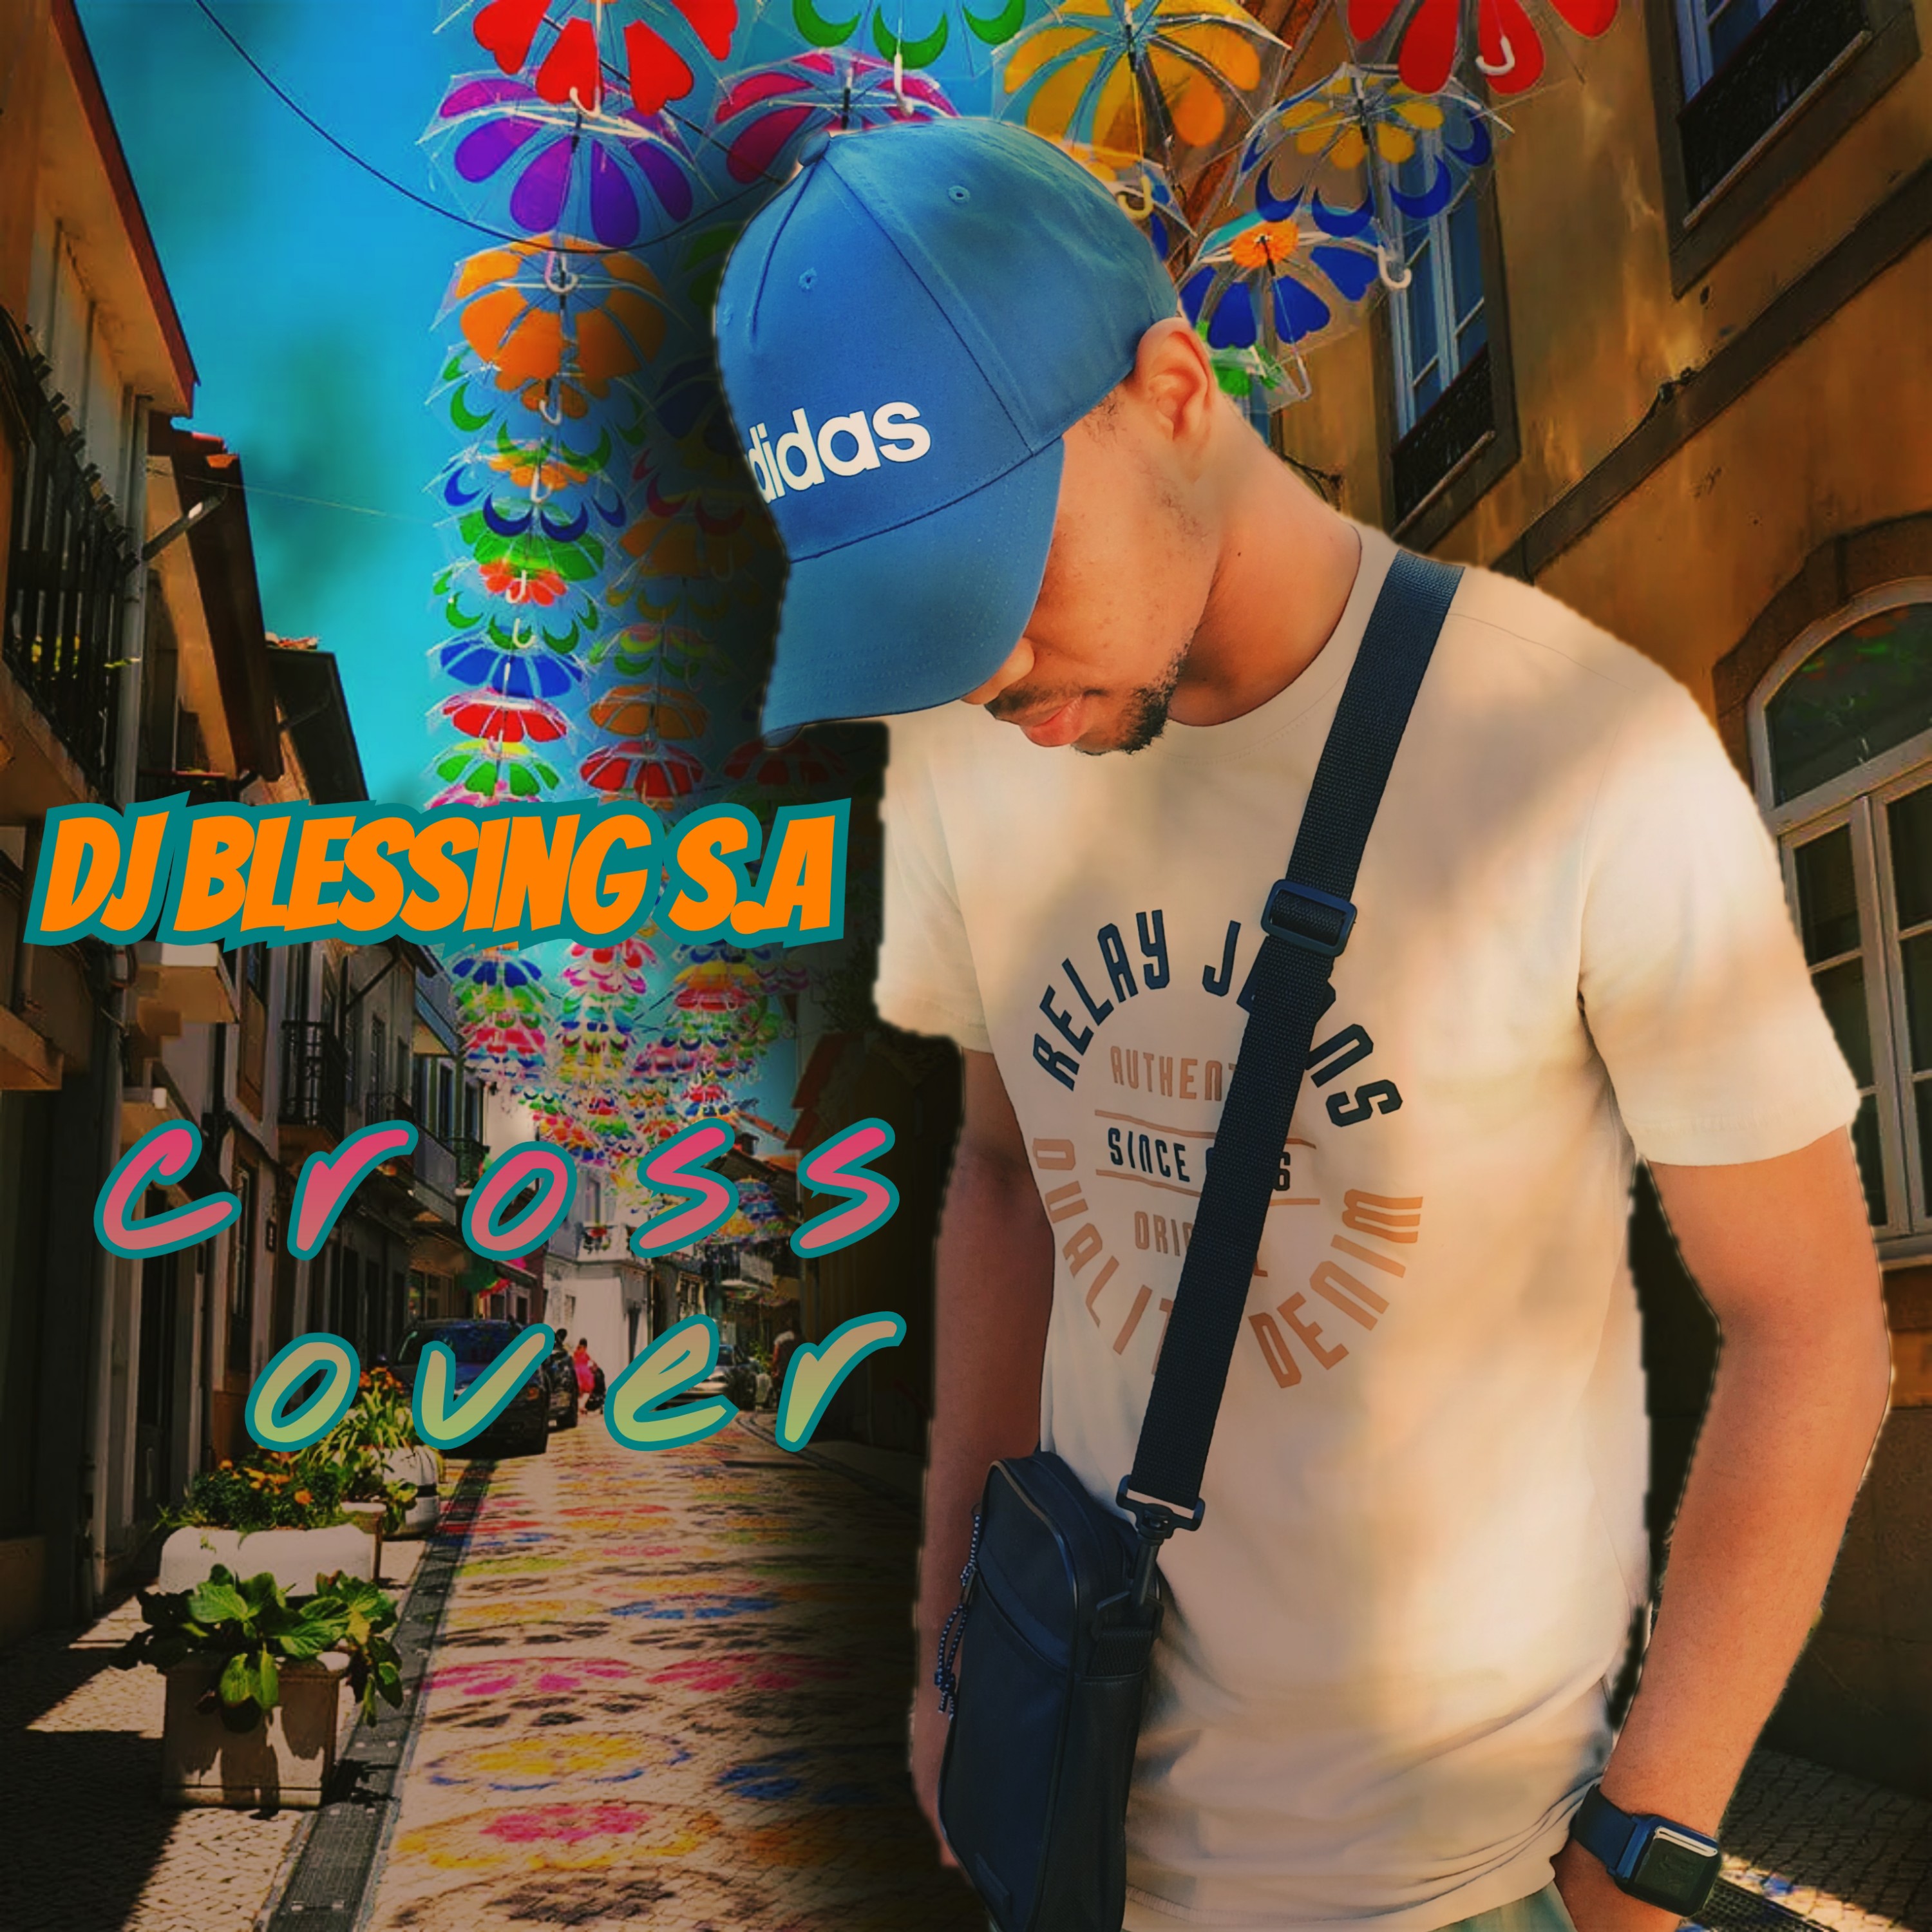 Cross over - Dj blessing s.a